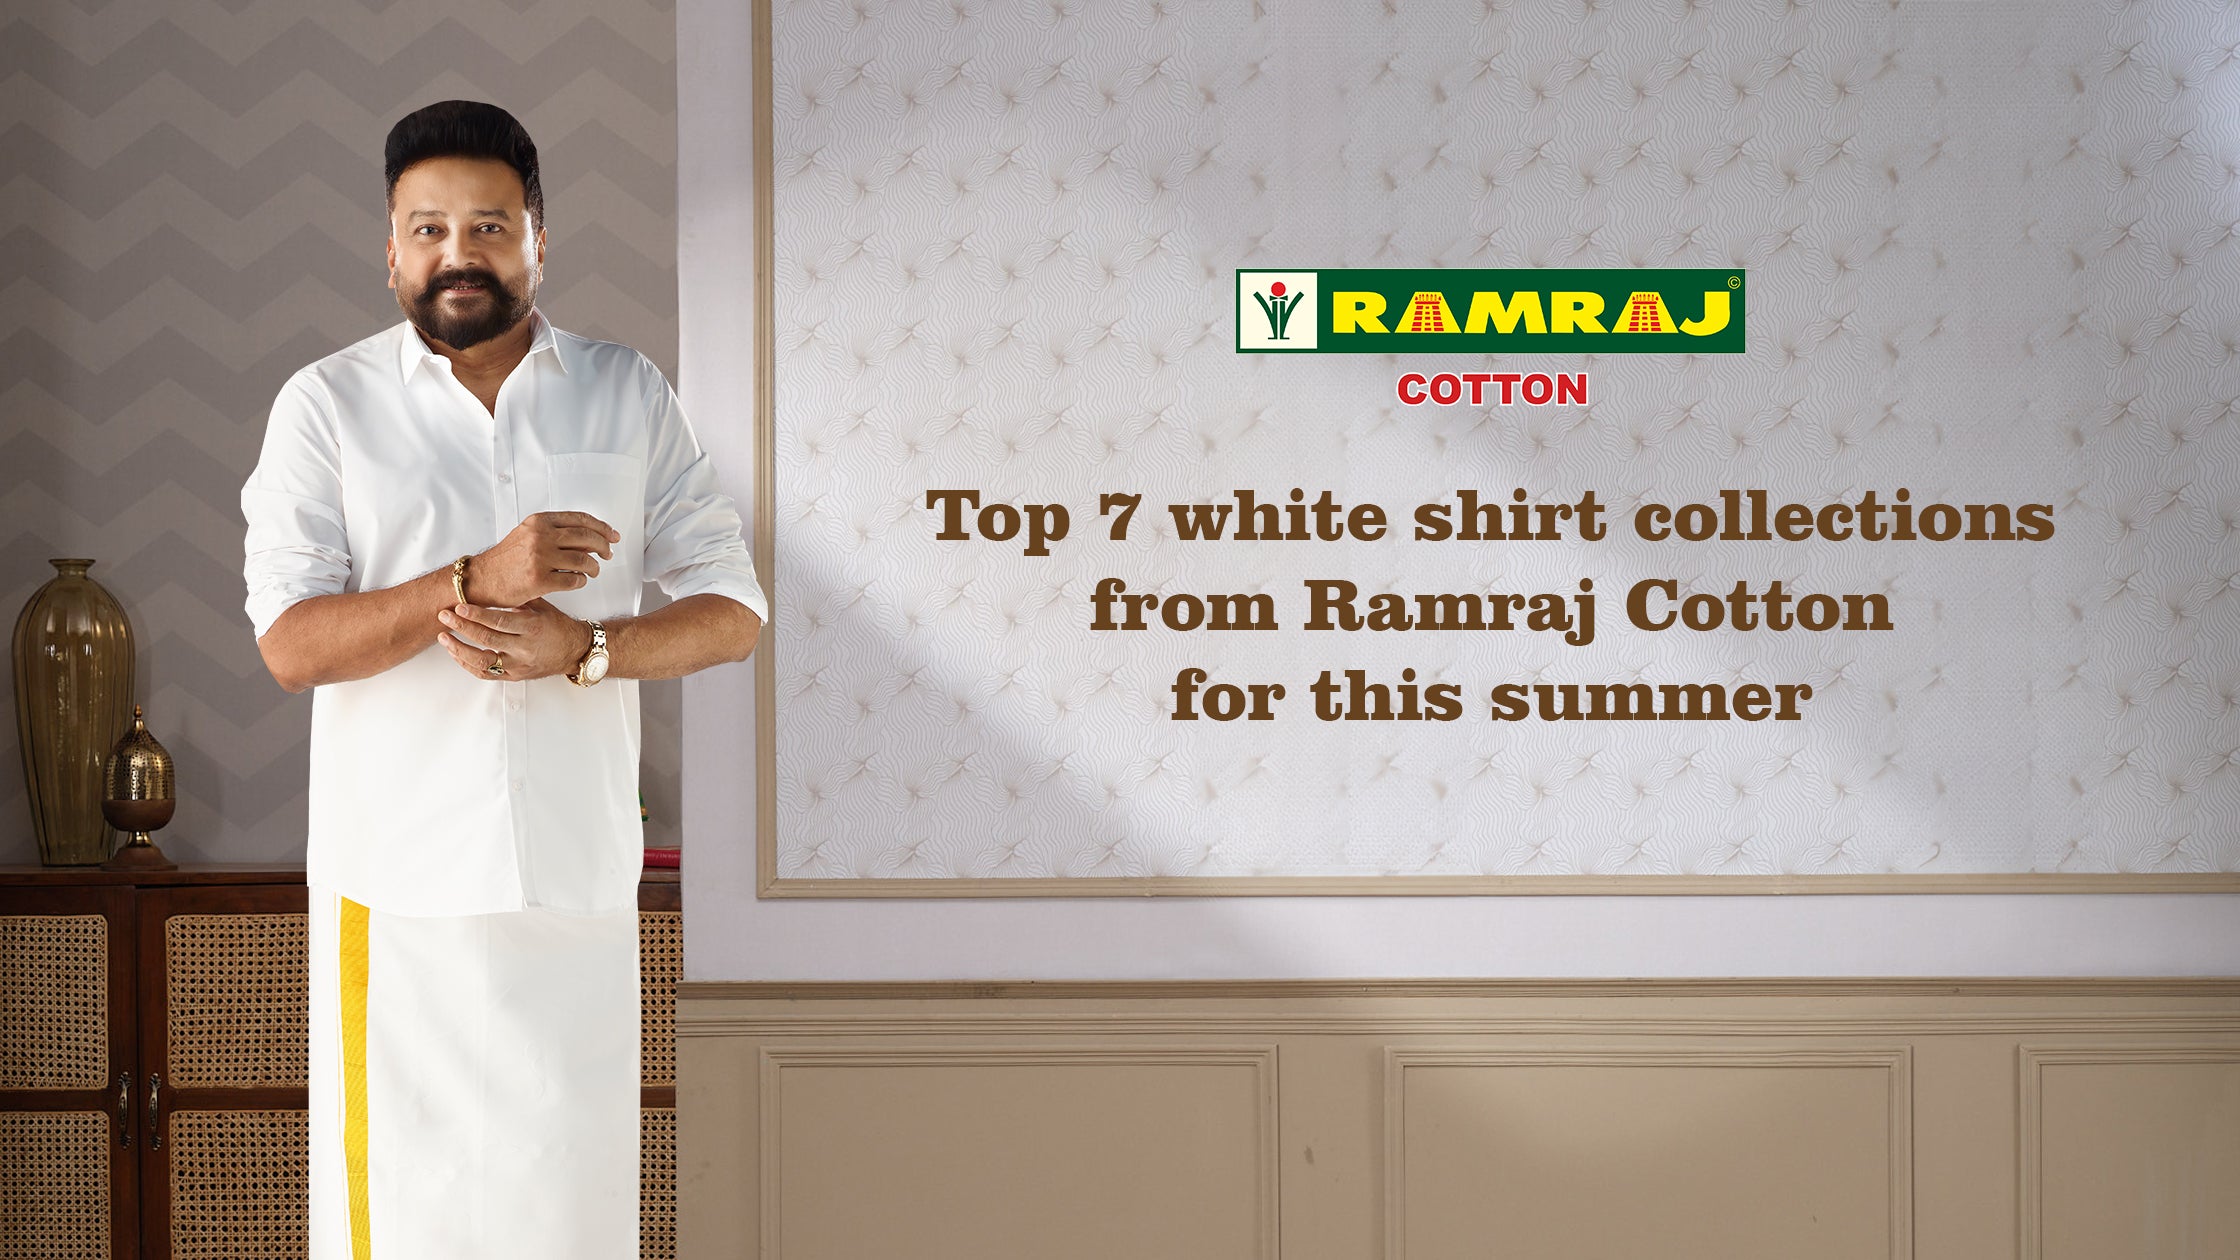 Top 7 shirt collections from Ramraj Cotton for this summer